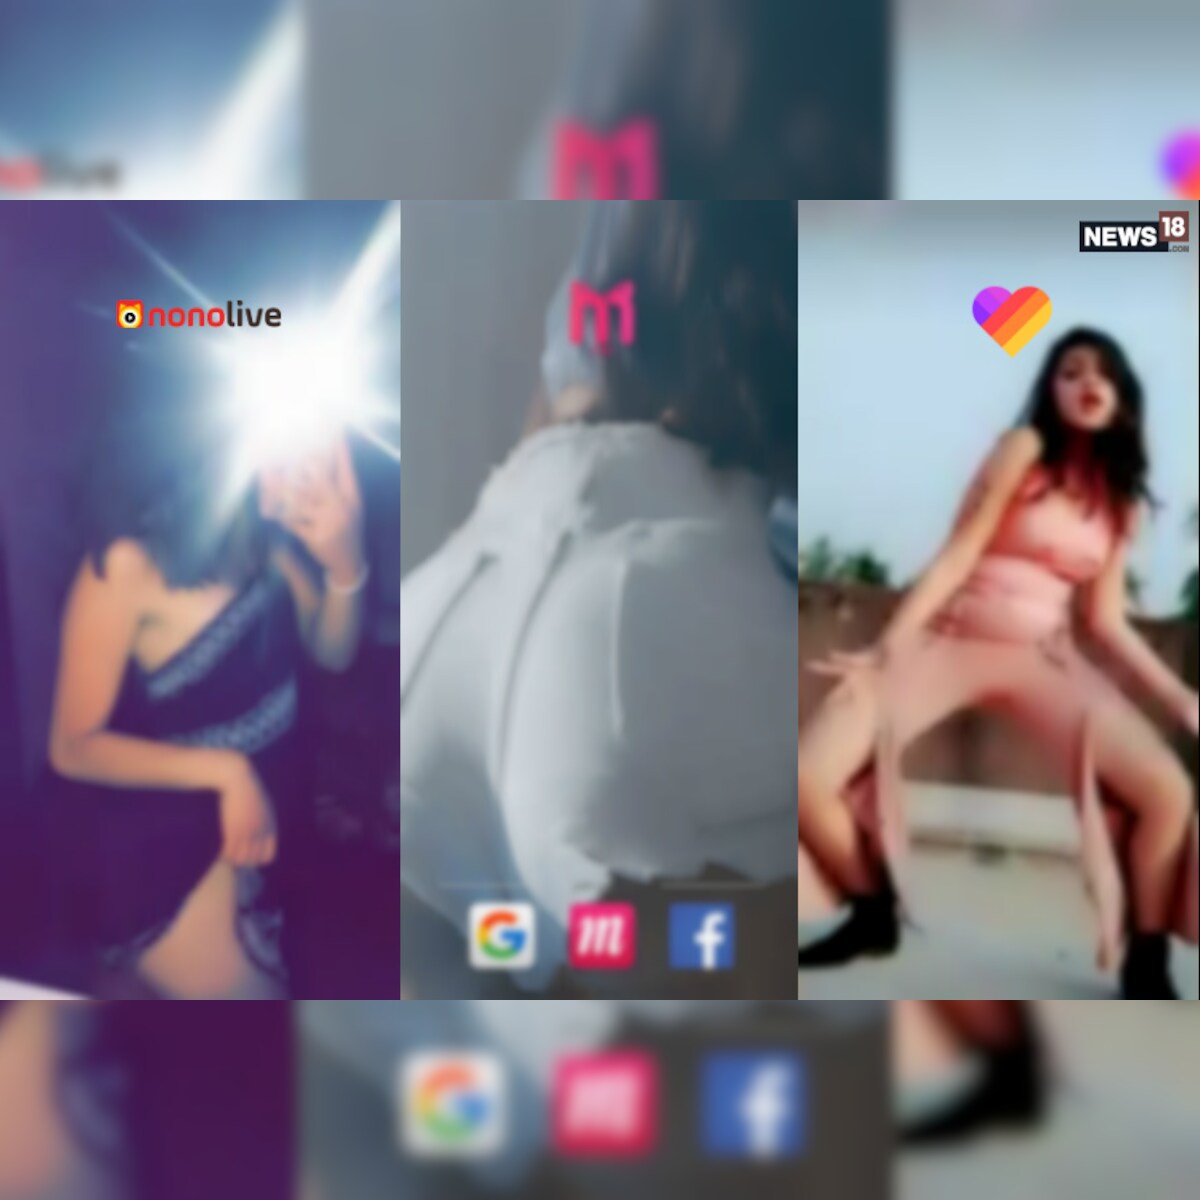 Live stream apps that allow nudity